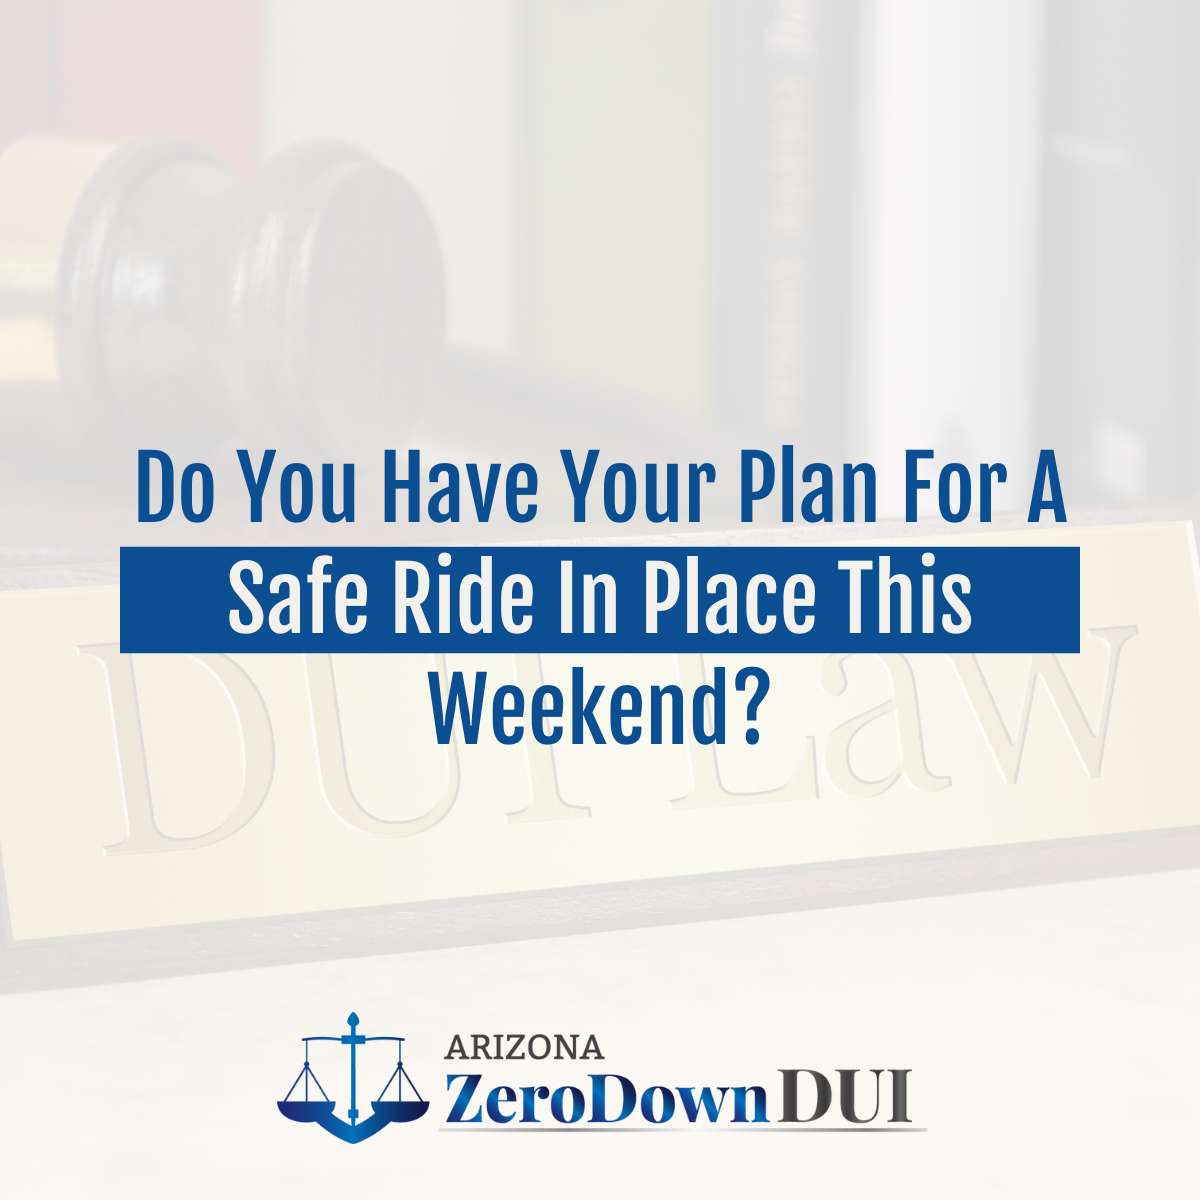 Do You Have Your Plan For A Safe Ride In Place This Weekend